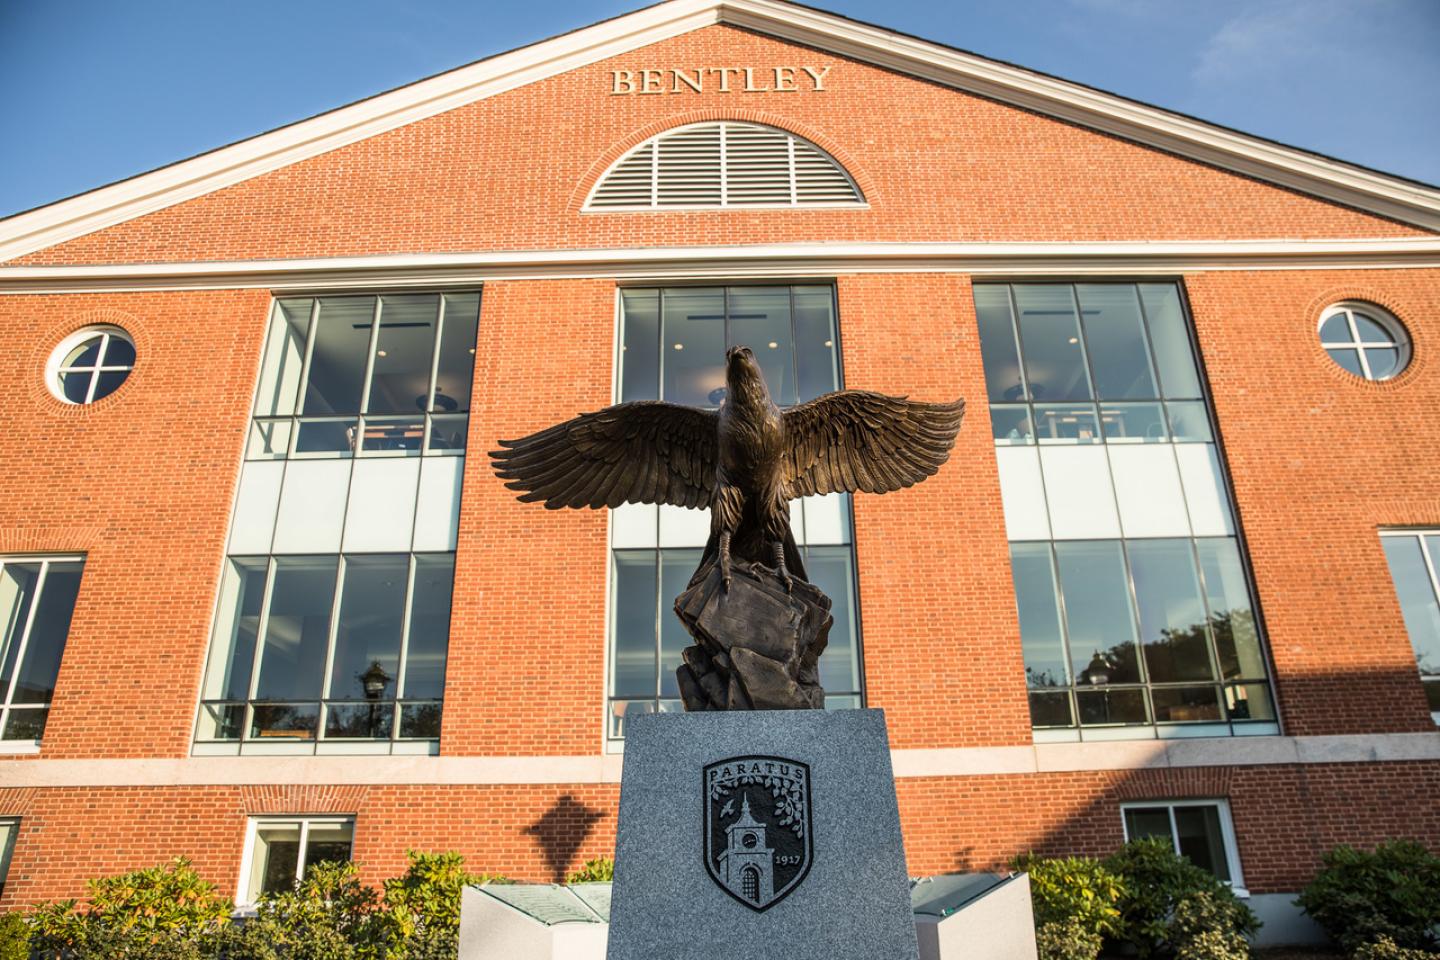 Photo of Bentley library with Falcon statue in foreground